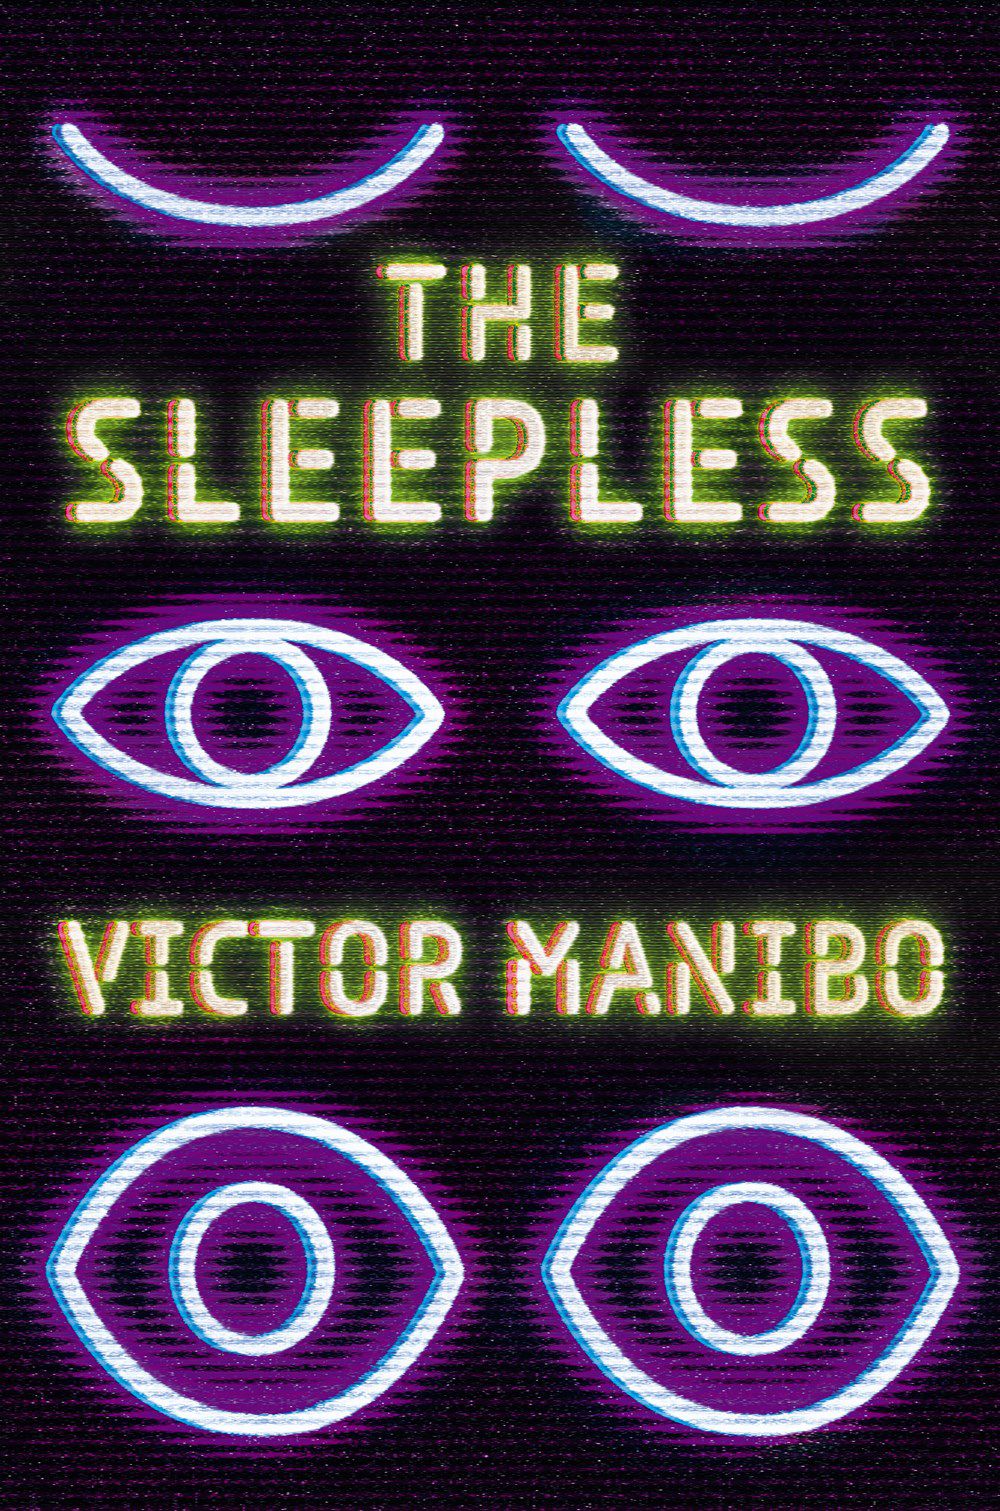 Cover image of The Sleepless by Victor Manibo, featuring three pairs of eyes in neon lights that gradually open.